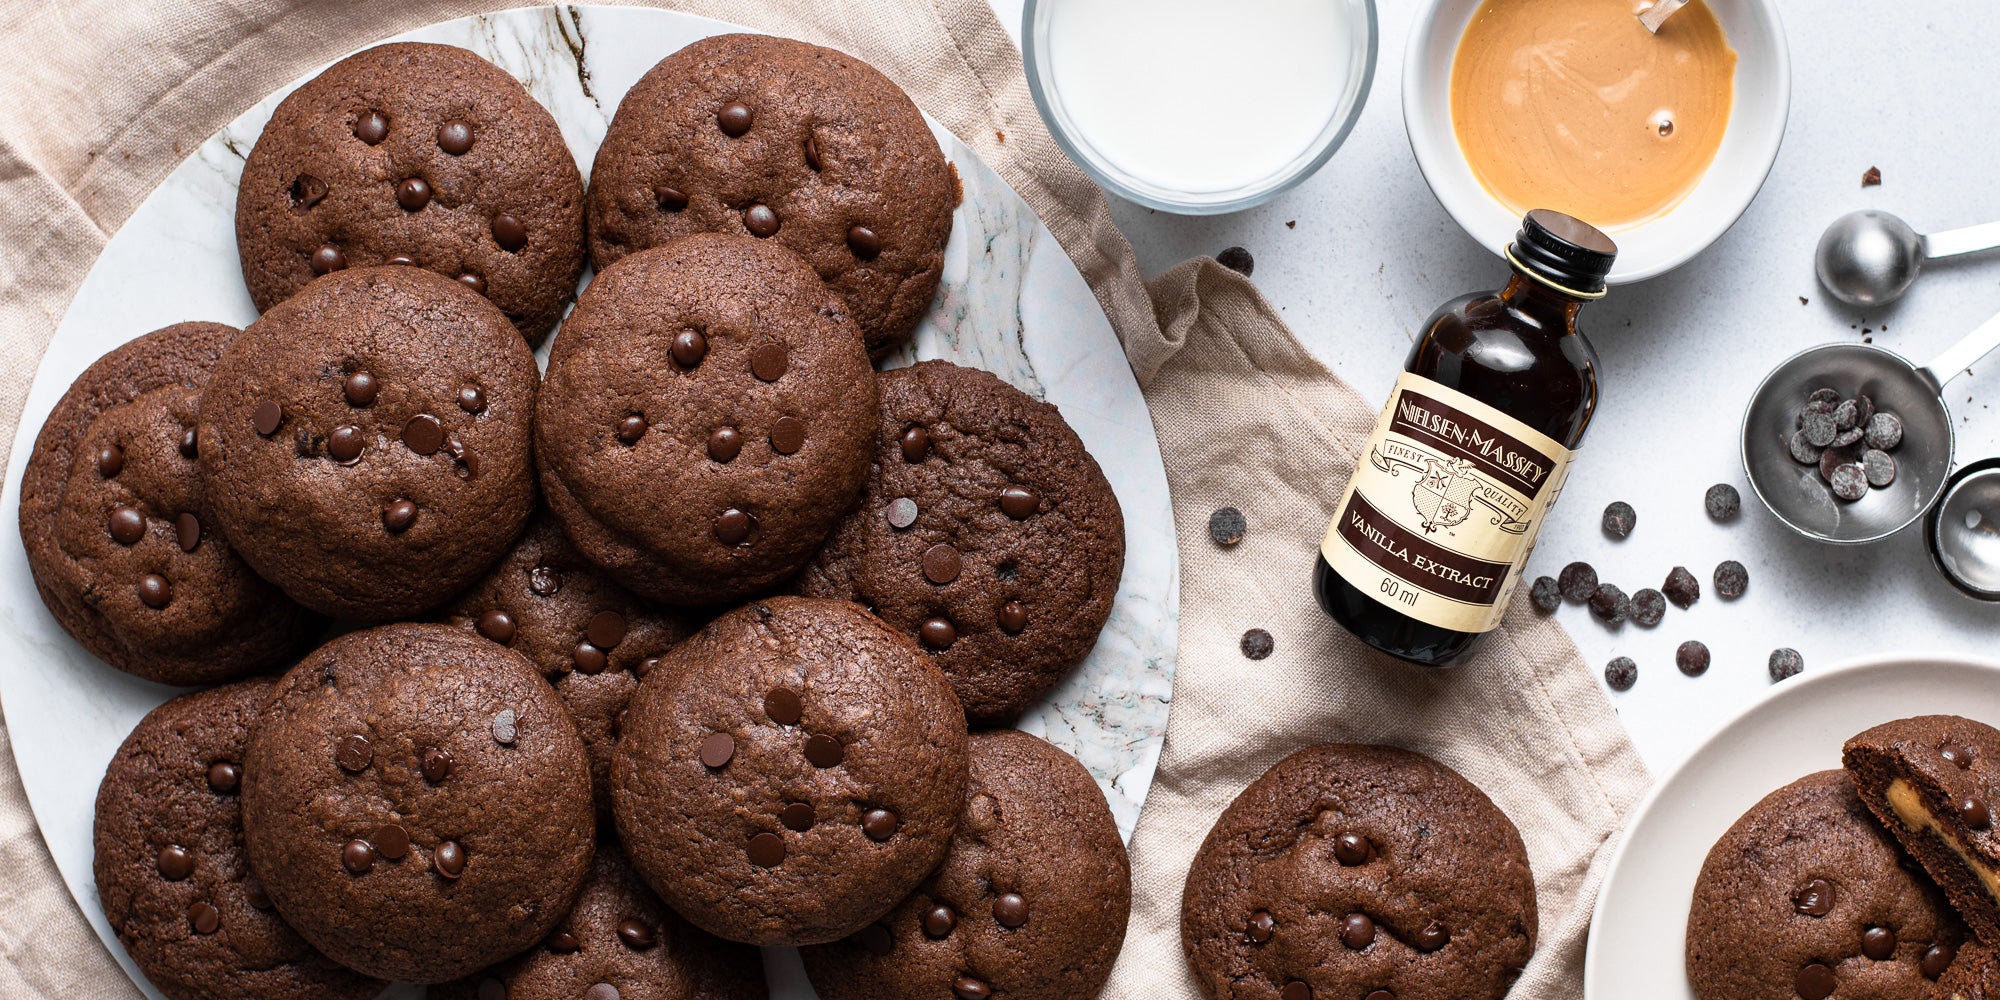 Chocolate & Peanut Butter Stuffed Cookies on a plate next to a bottle of Nielsen-Massey vanilla extract